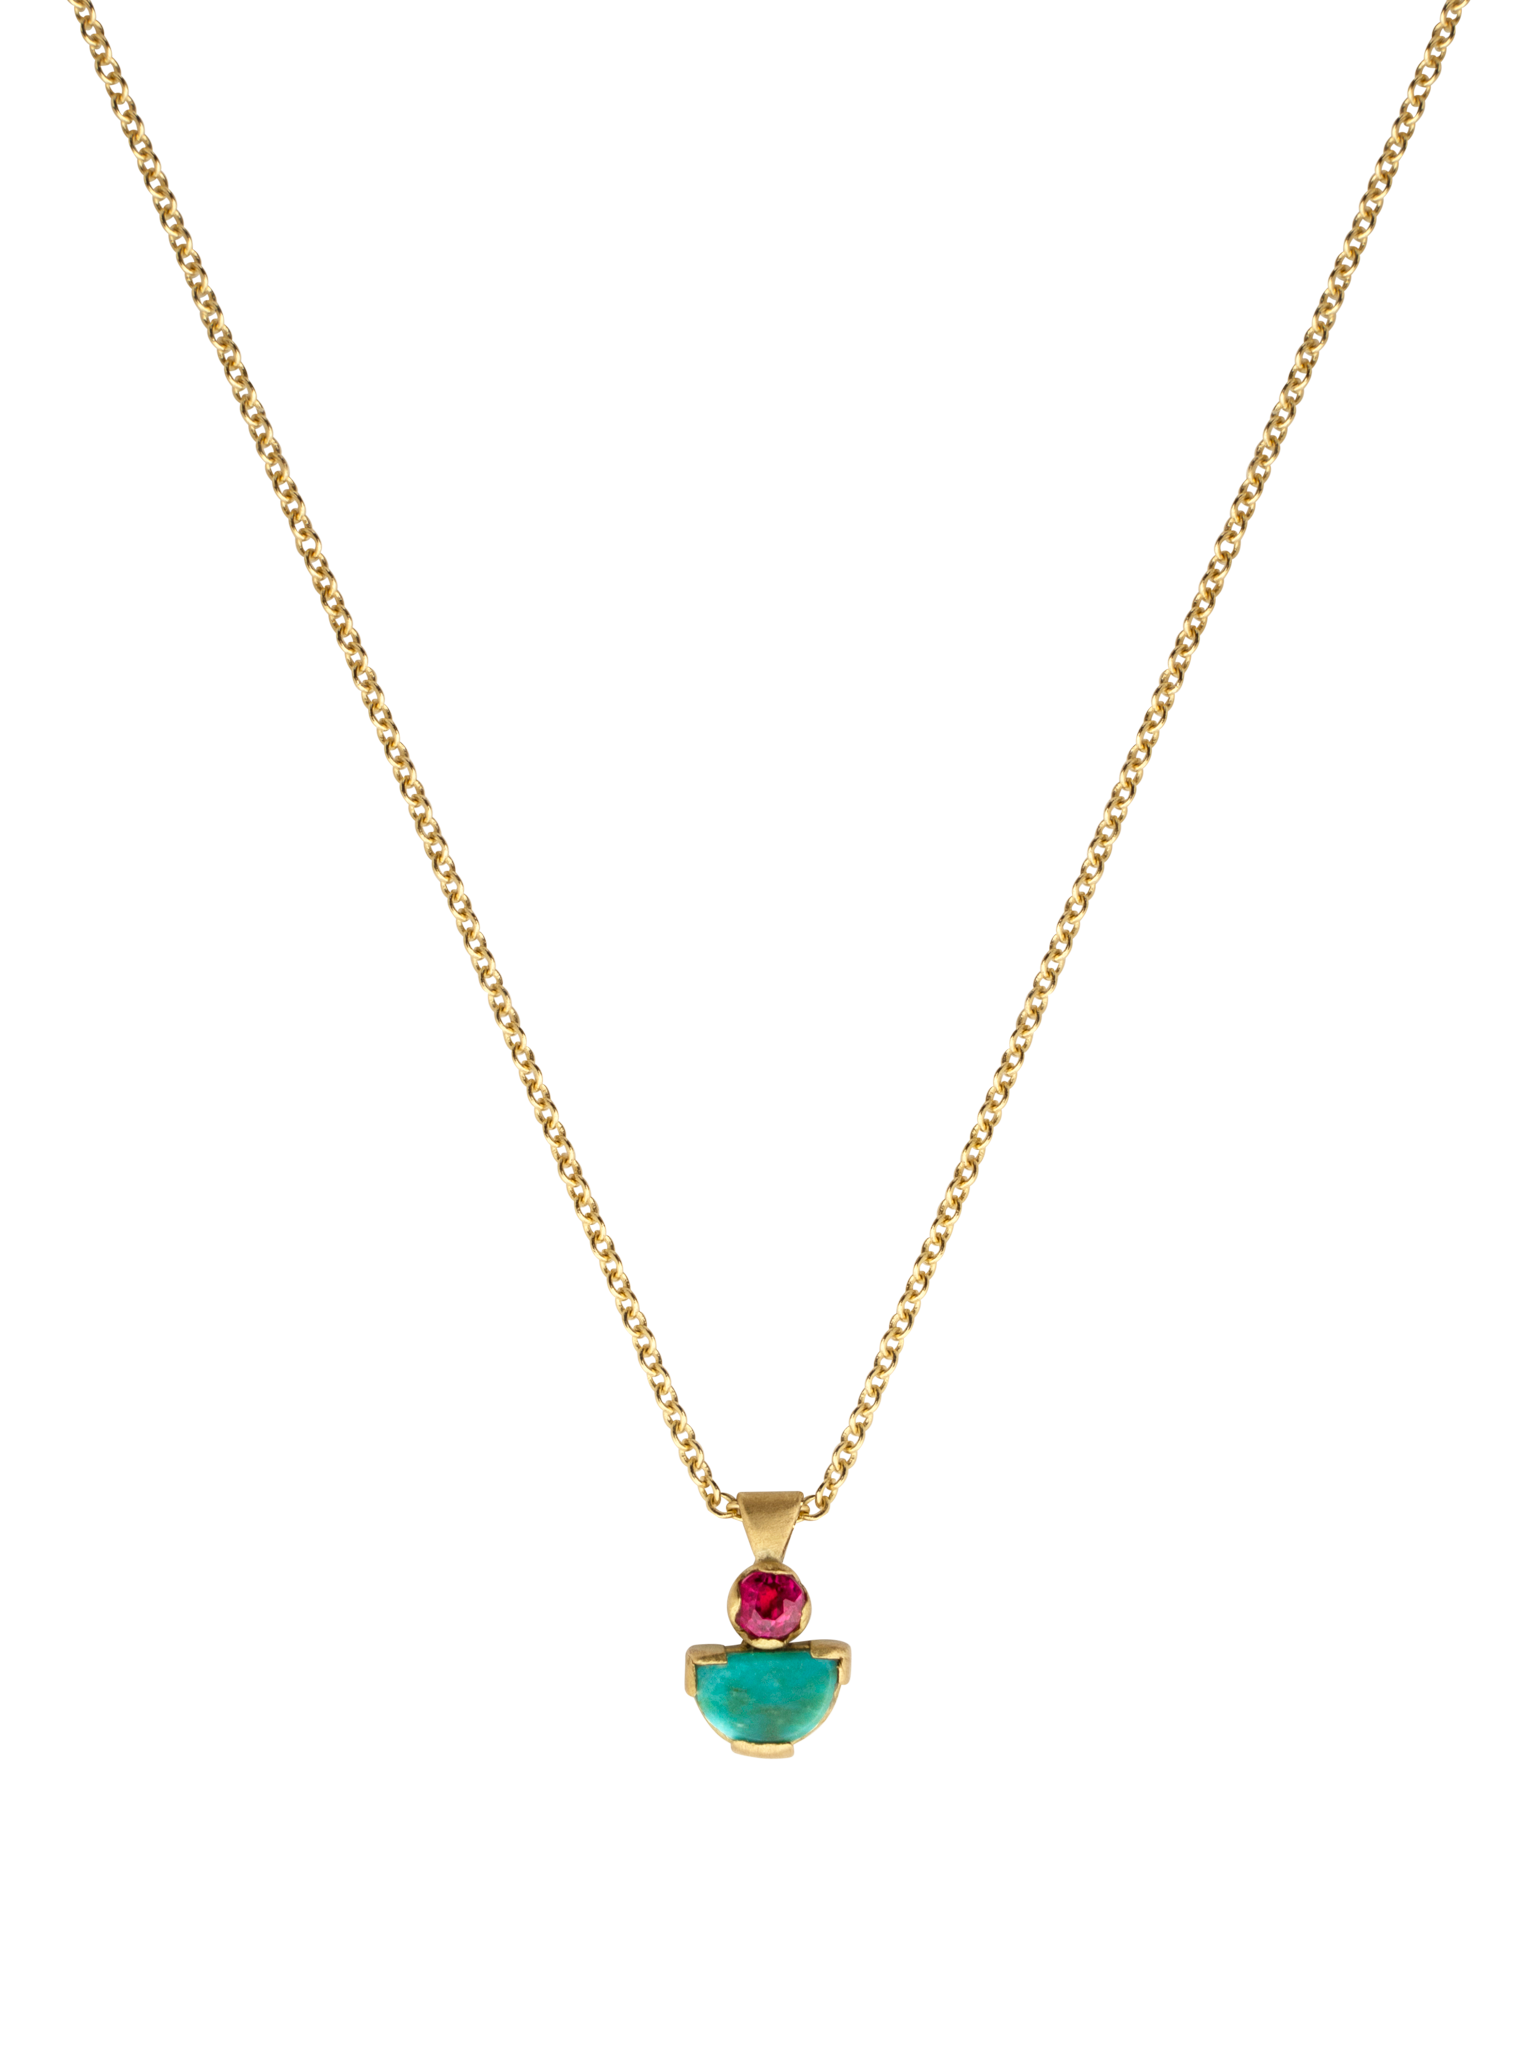 Ruby and turquoise mina pendant necklace